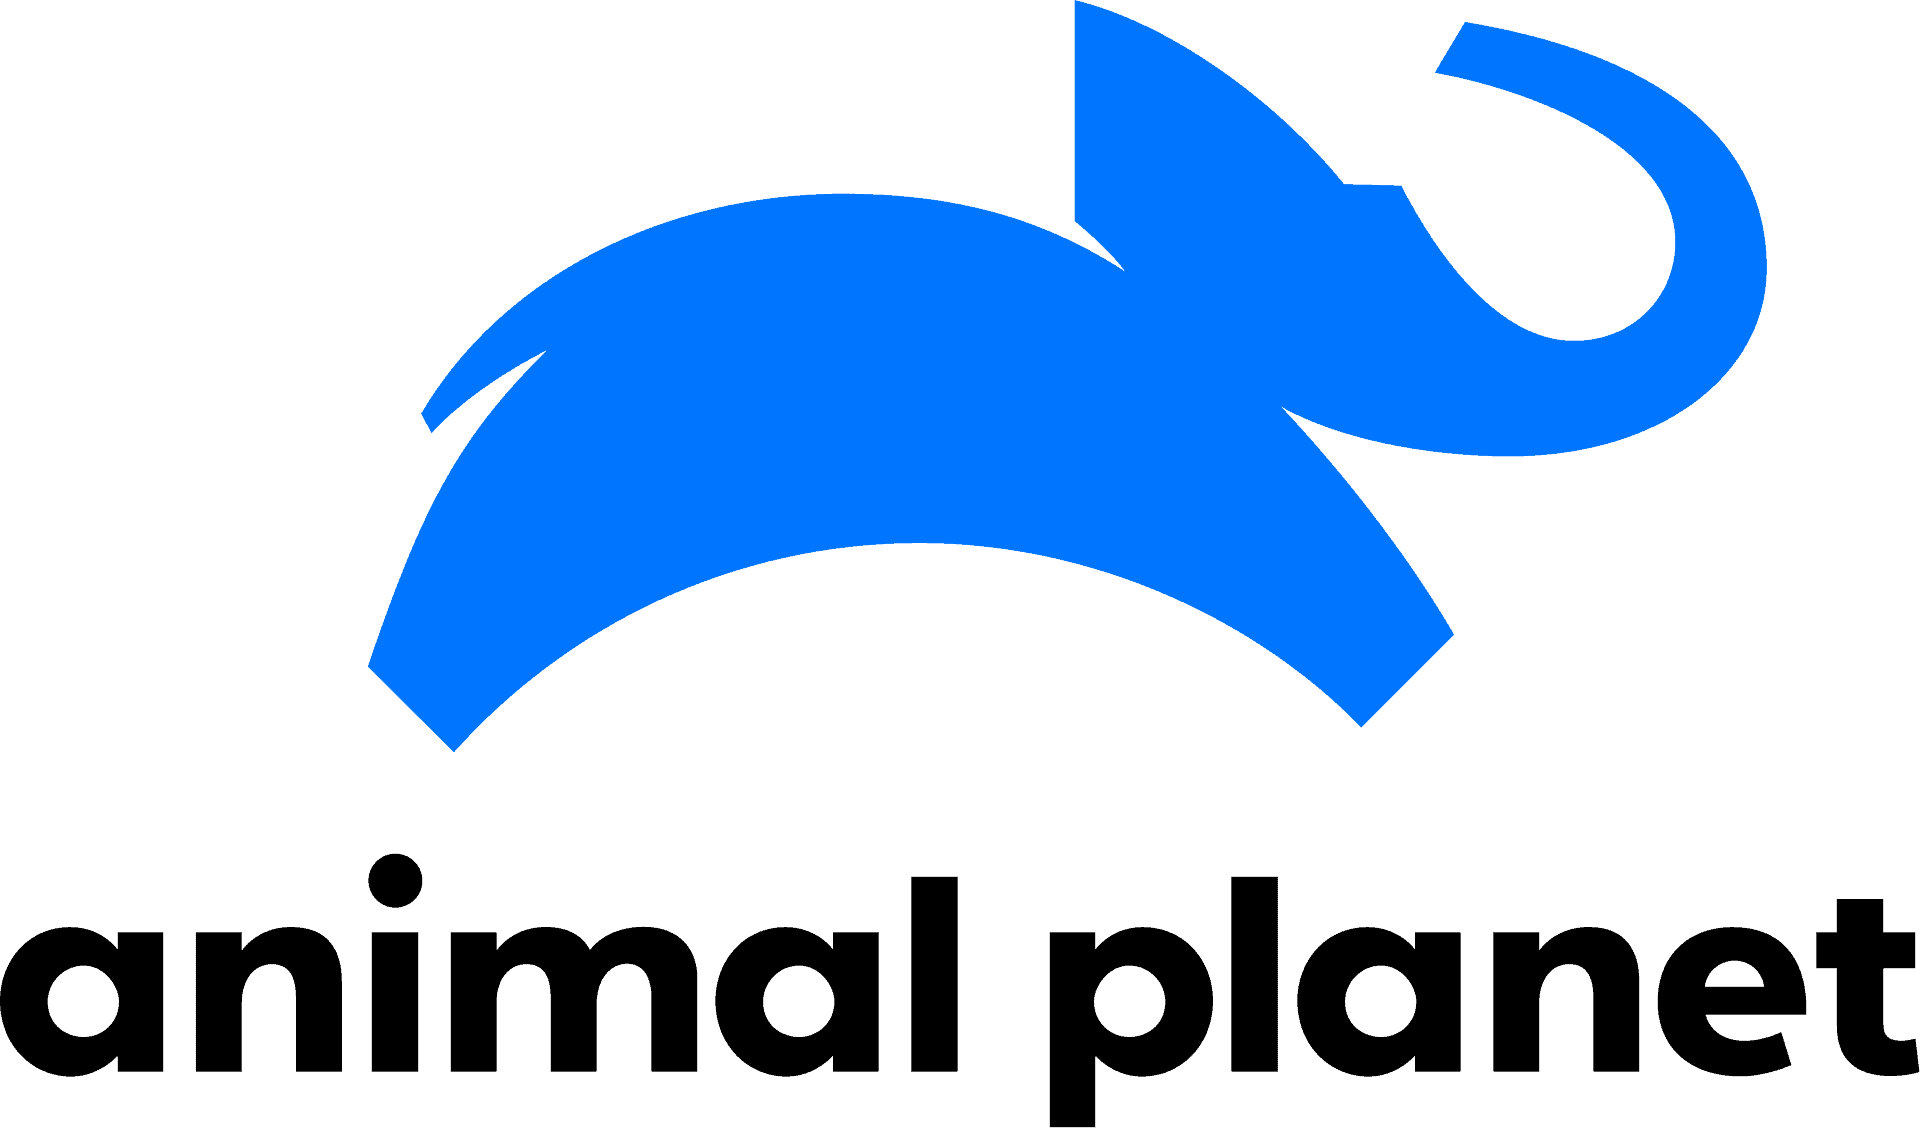 How to Stream Animal Planet Without Cable